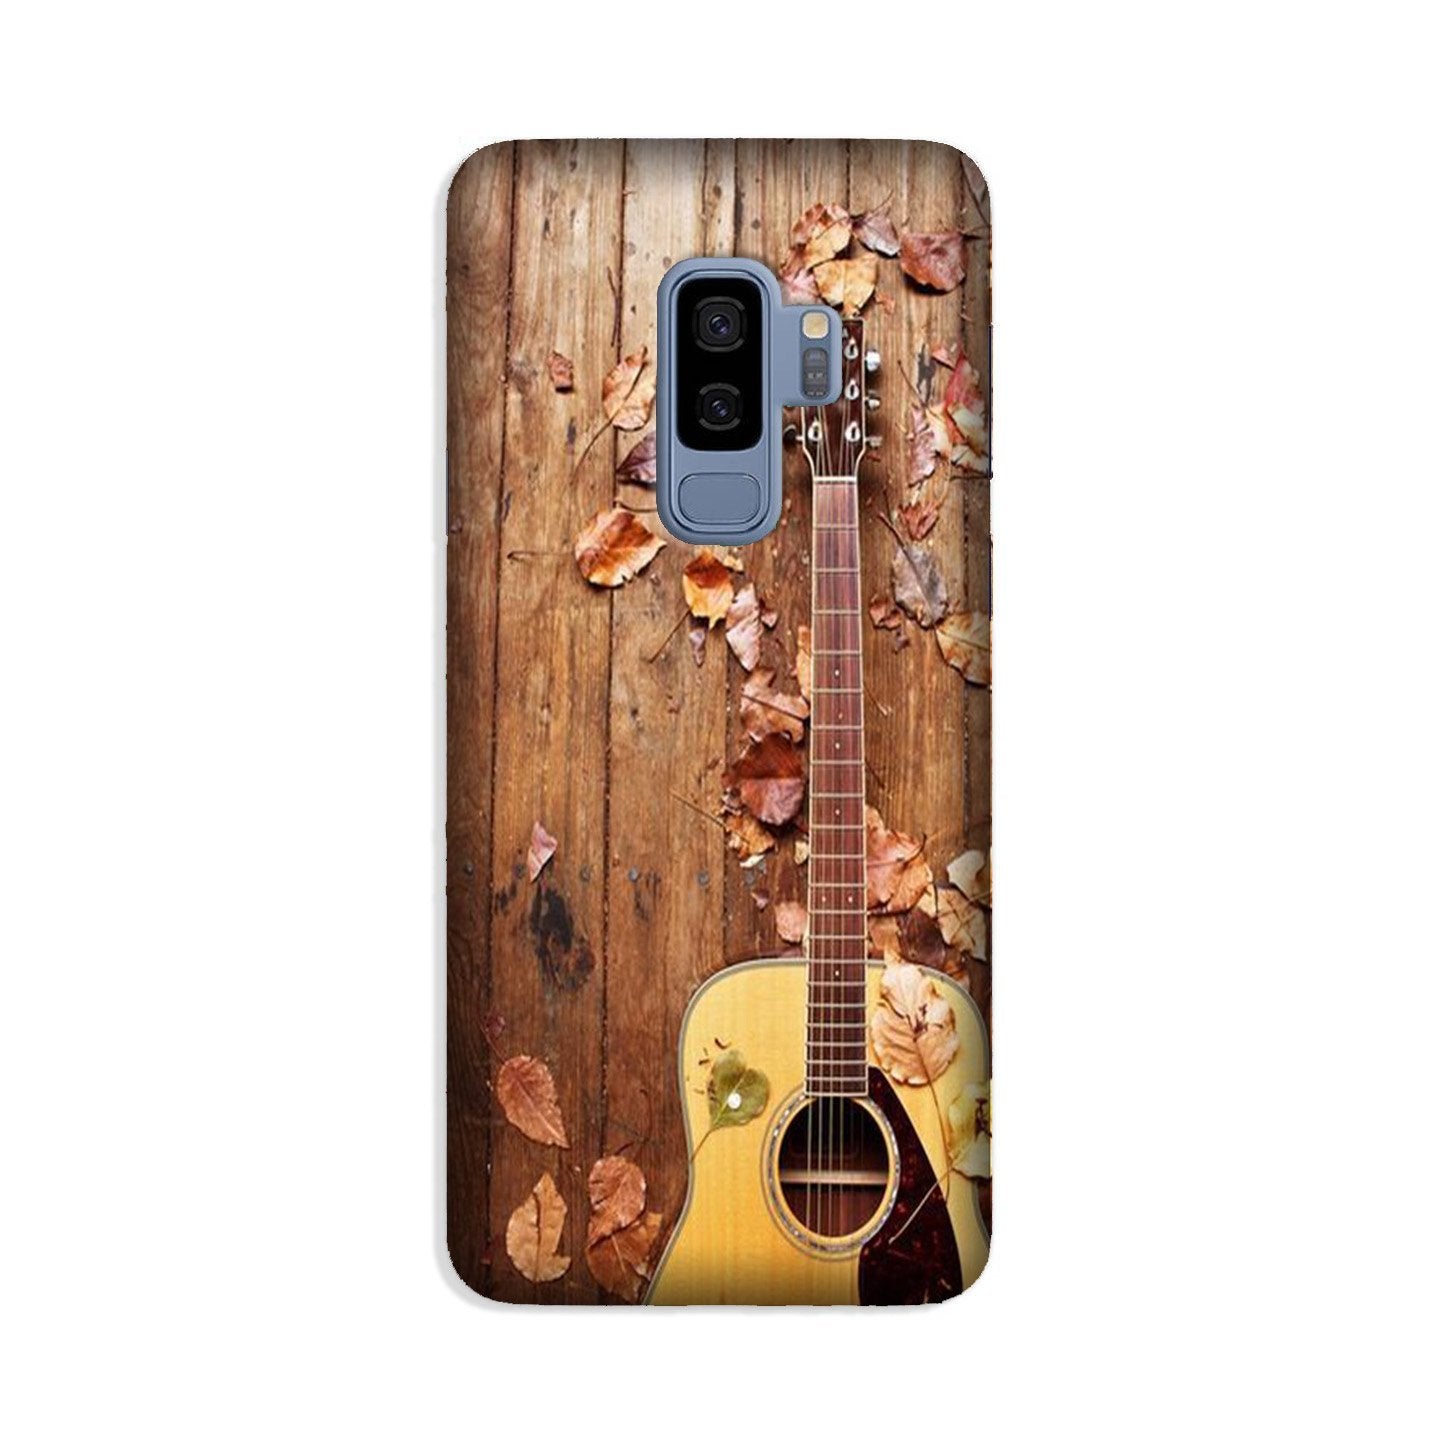 Guitar Case for Galaxy S9 Plus